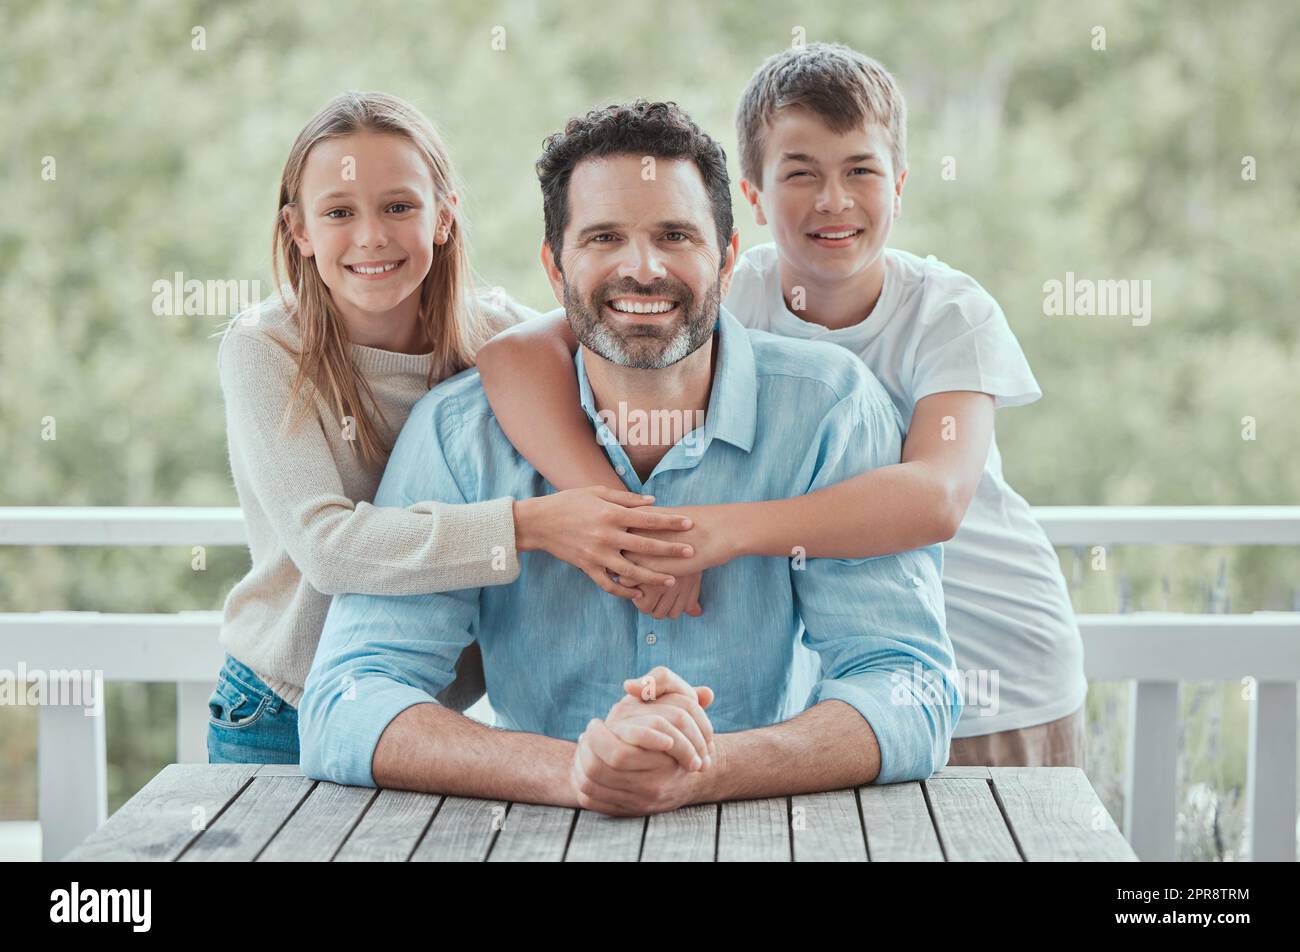 They love their dad. a father spending time with his children at home. Stock Photo